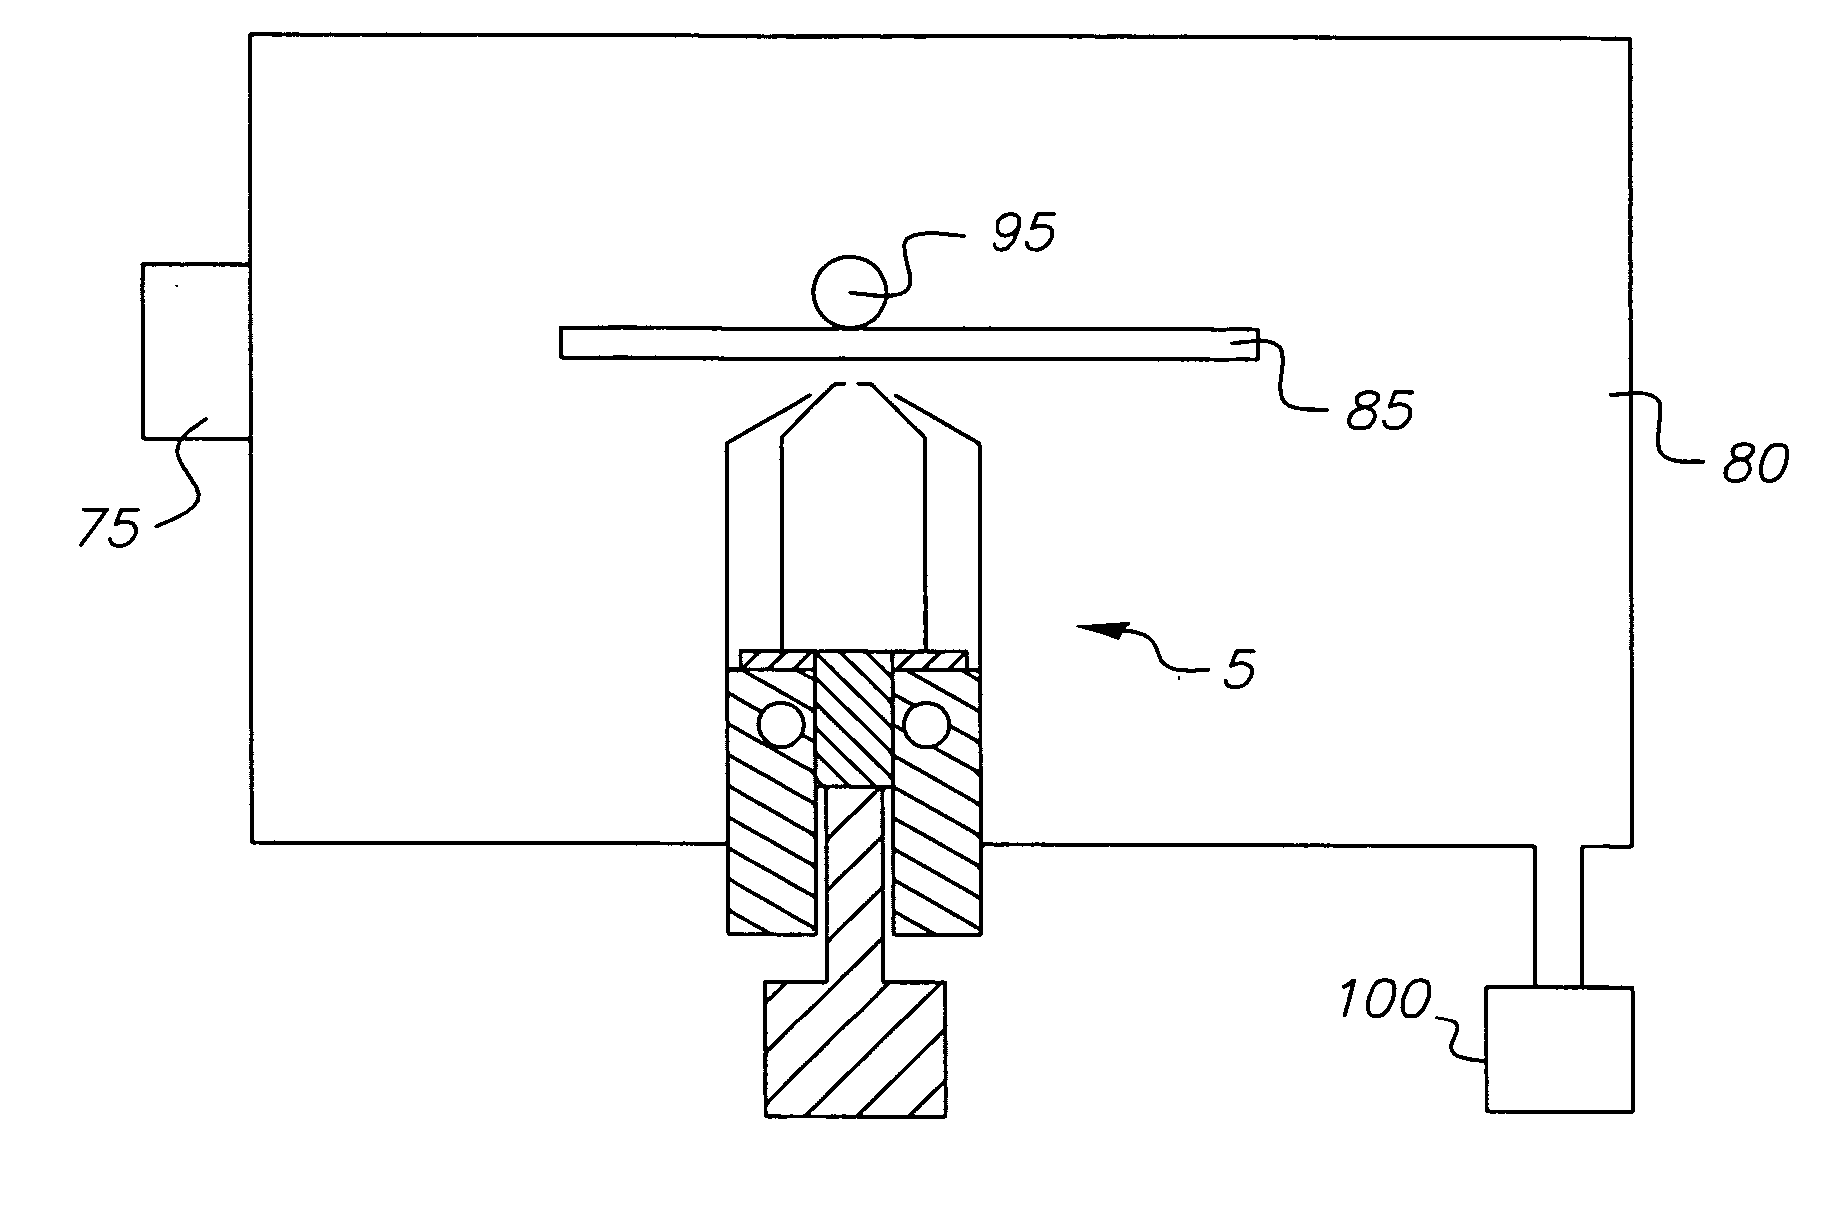 Device and method for vaporizing temperature sensitive materials